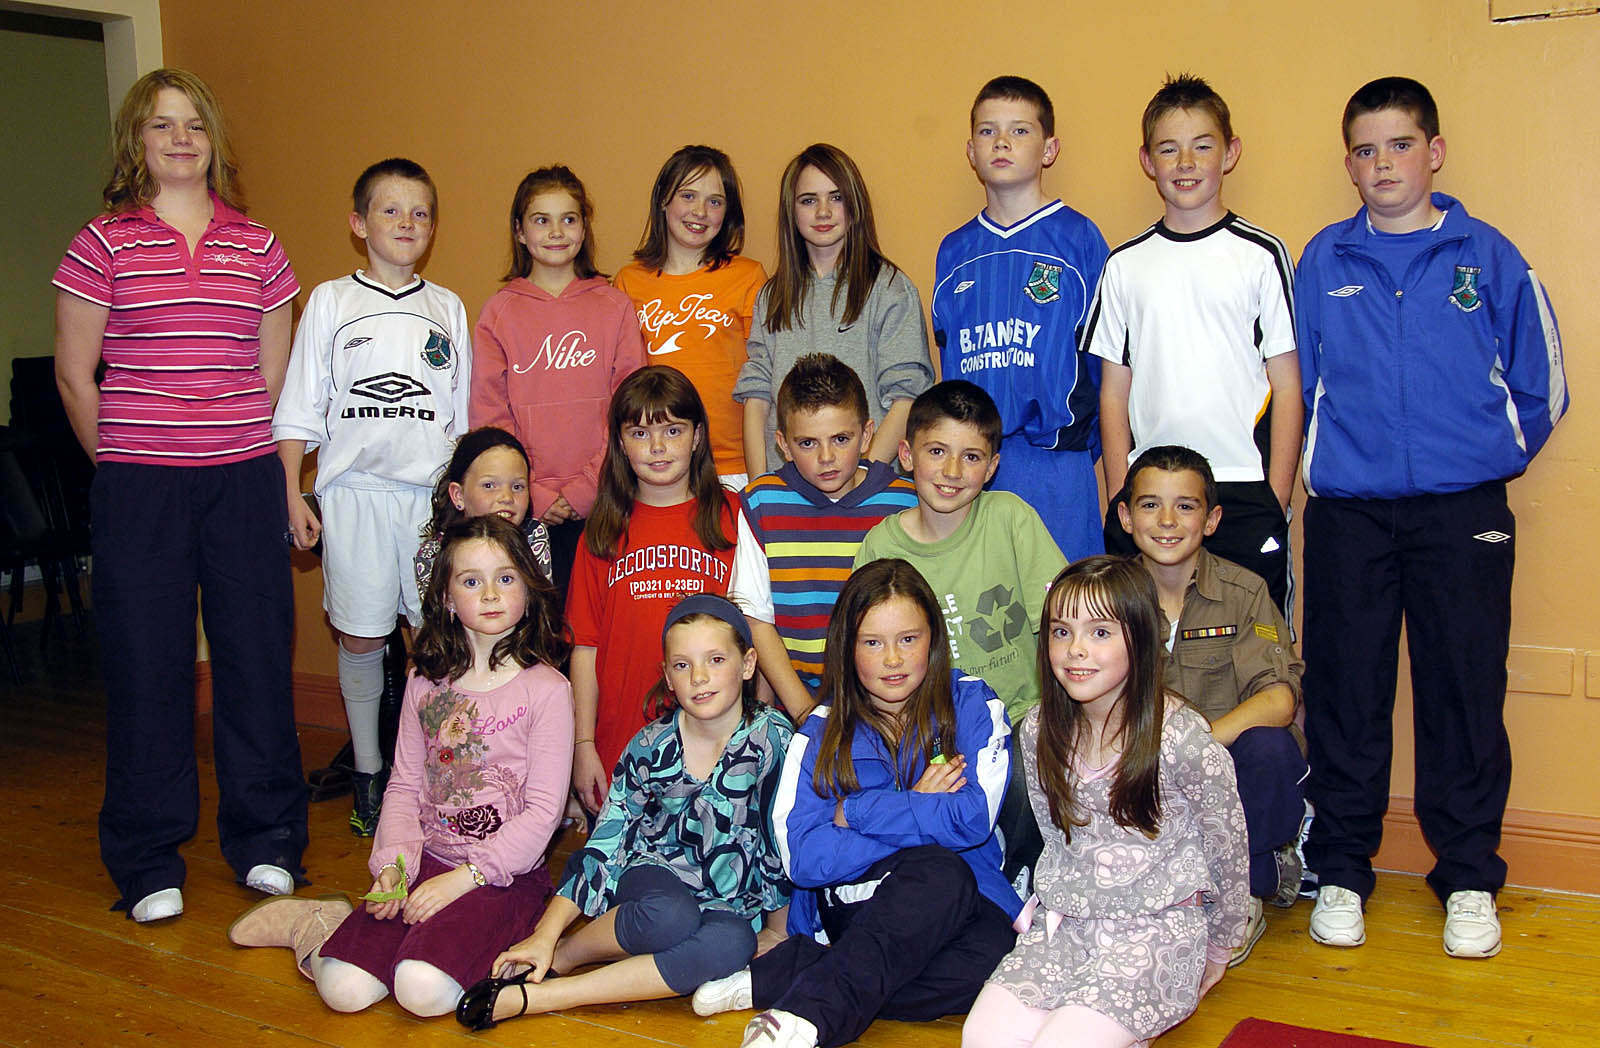 Pictured in the Resource centre in Balla at a Fashion Show organised by Manulla Football Club Youth Council to raise funds for Manulla Football Club. Outfits for the night were supplied by Next Step, Elverys, Adams at Shaws, Beverley Hills and Padraic McHales. Some of the junior players who were modelling on the night Photo  Ken Wright Photography 2007

